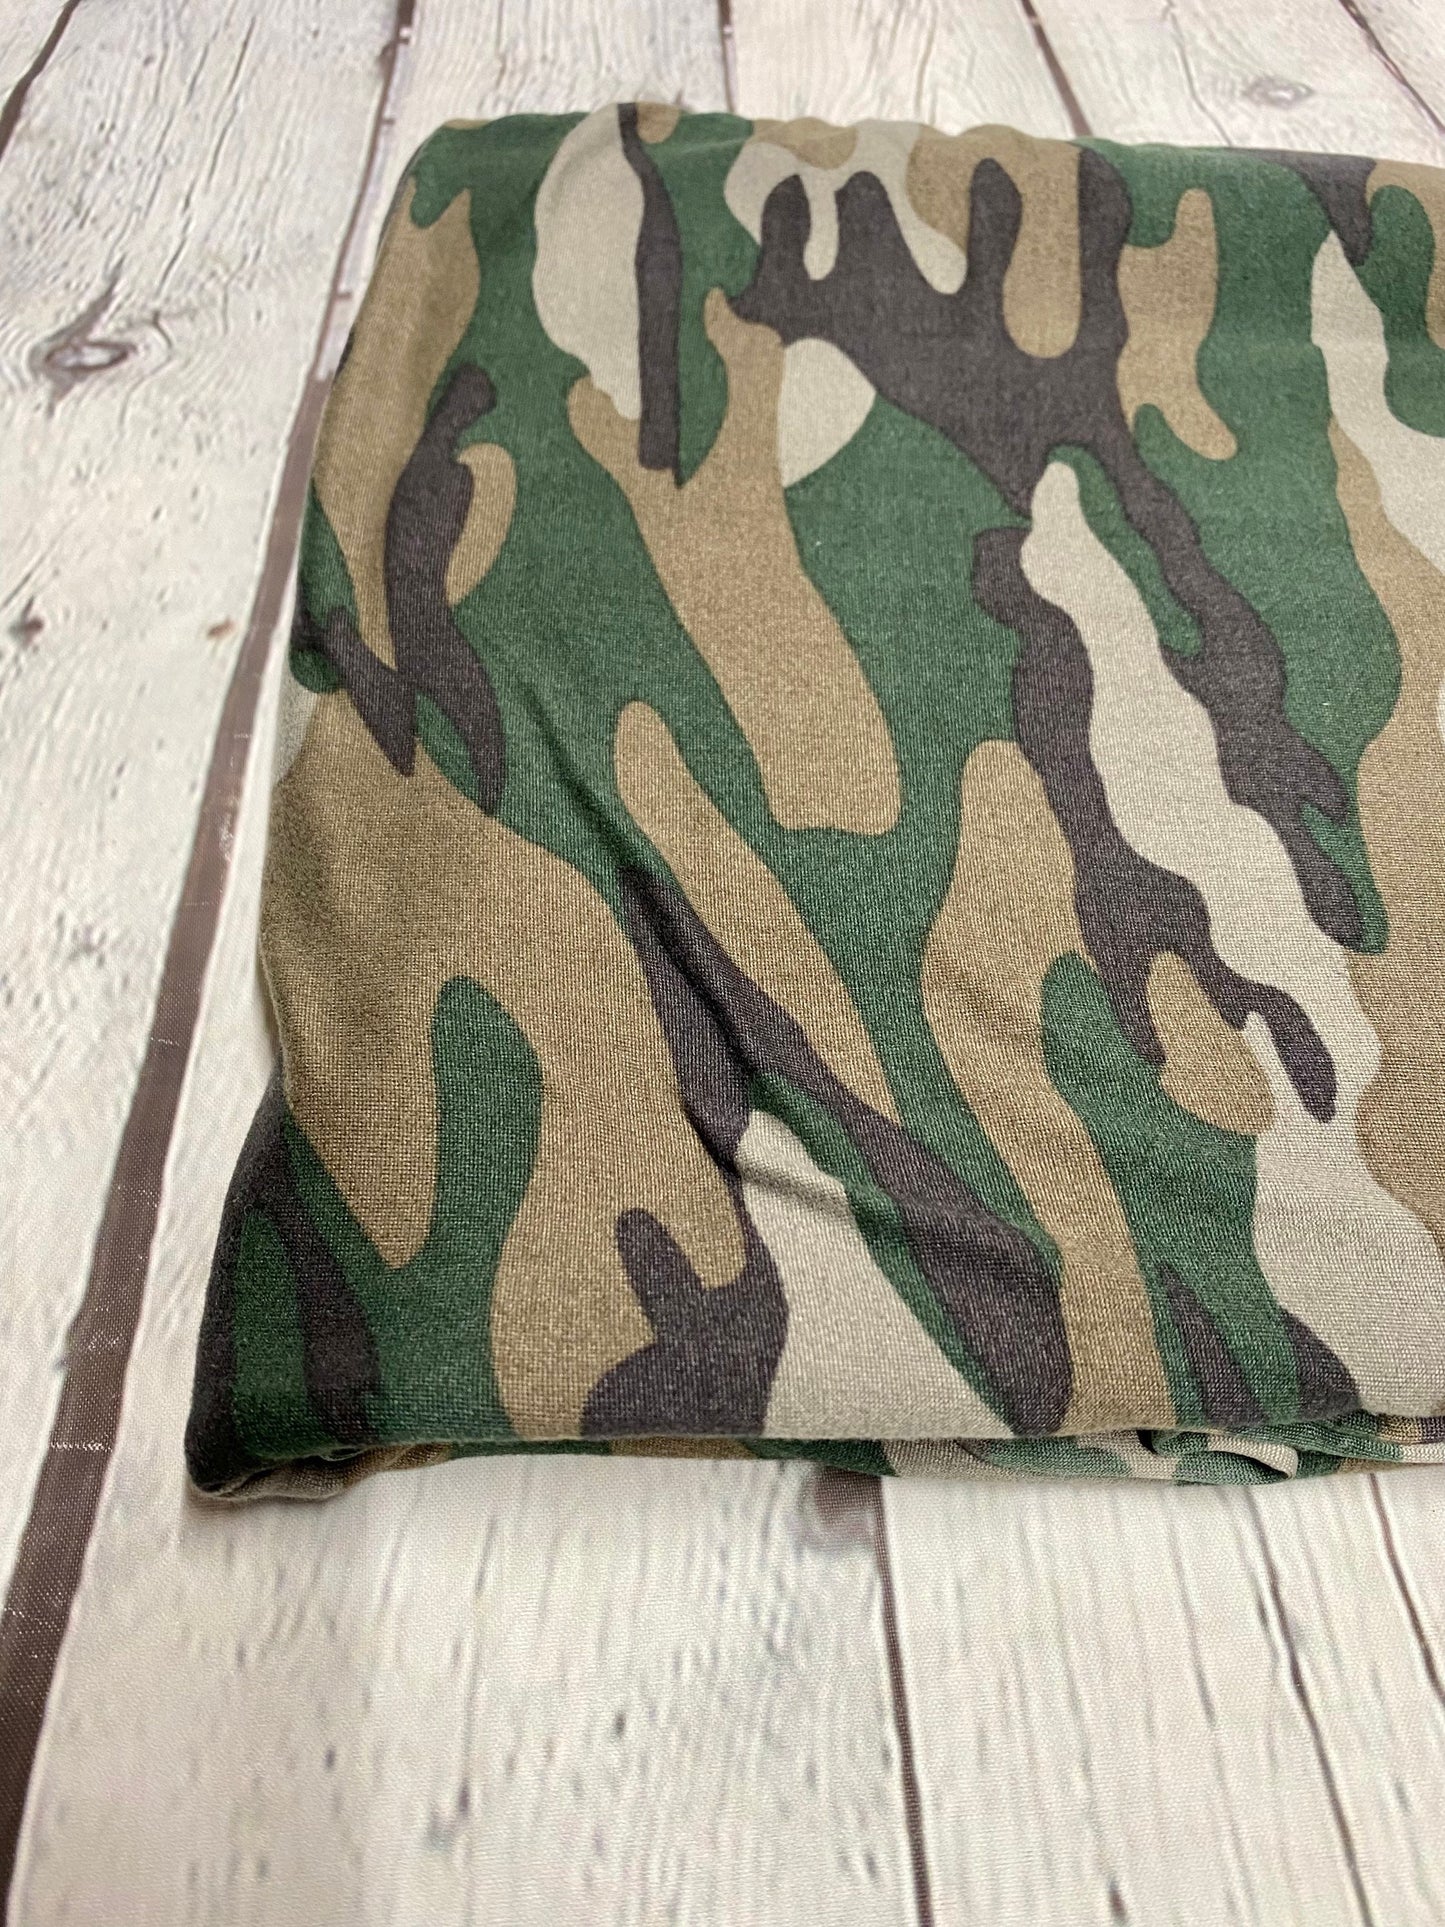 DBP Double Brushed Poly Spandex Camouflage Army Camo Print Fabric By The Yard